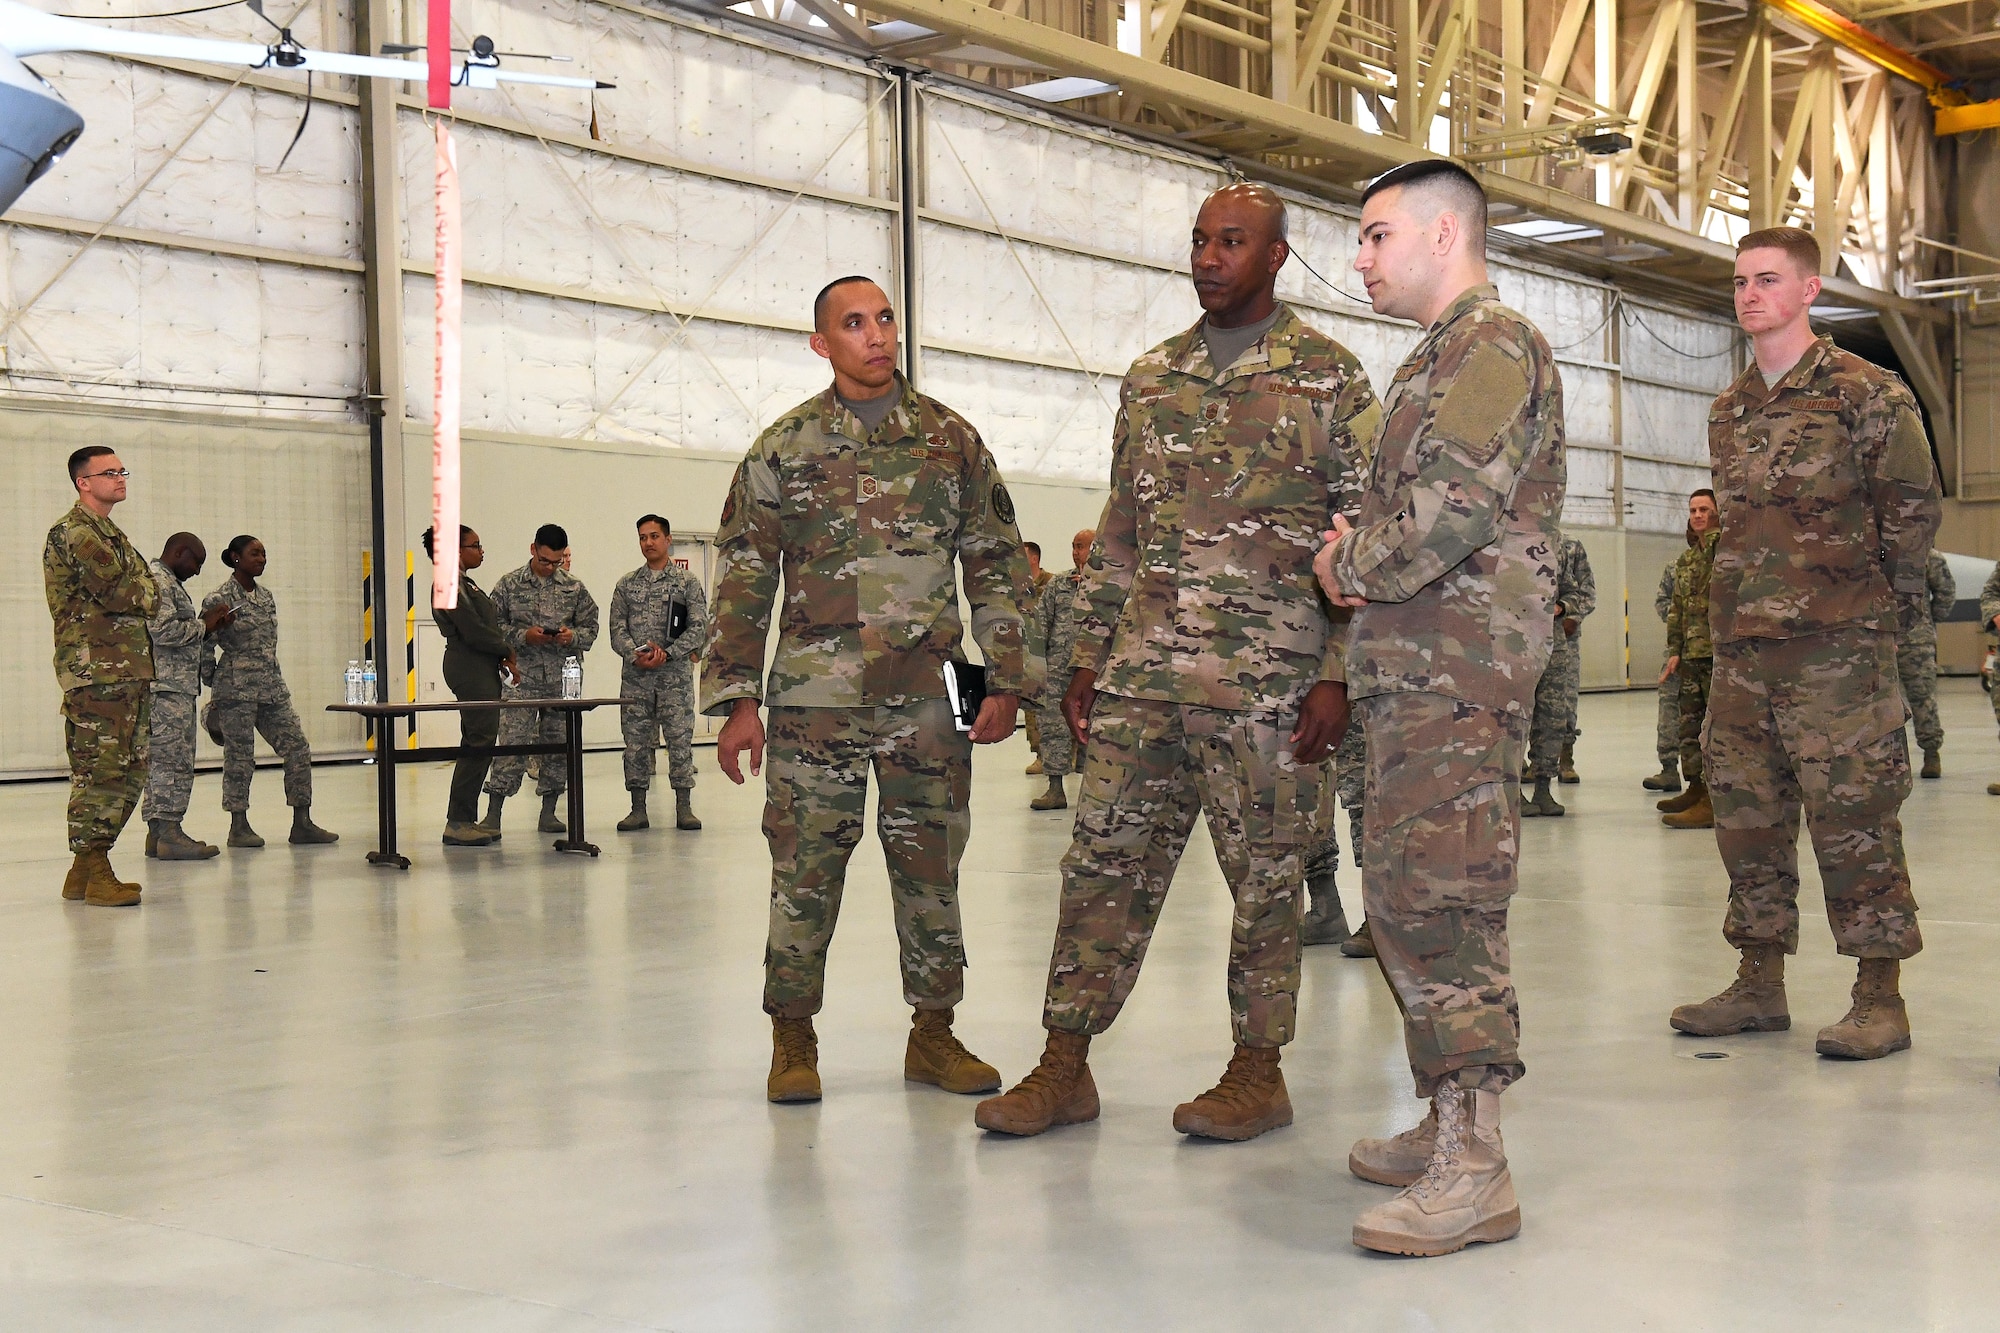 As part of his first visit to Creech, Wright had the opportunity to talk to maintenance Airmen about the MQ-9 and learn about their unique Remotely Piloted Aircraft mission.